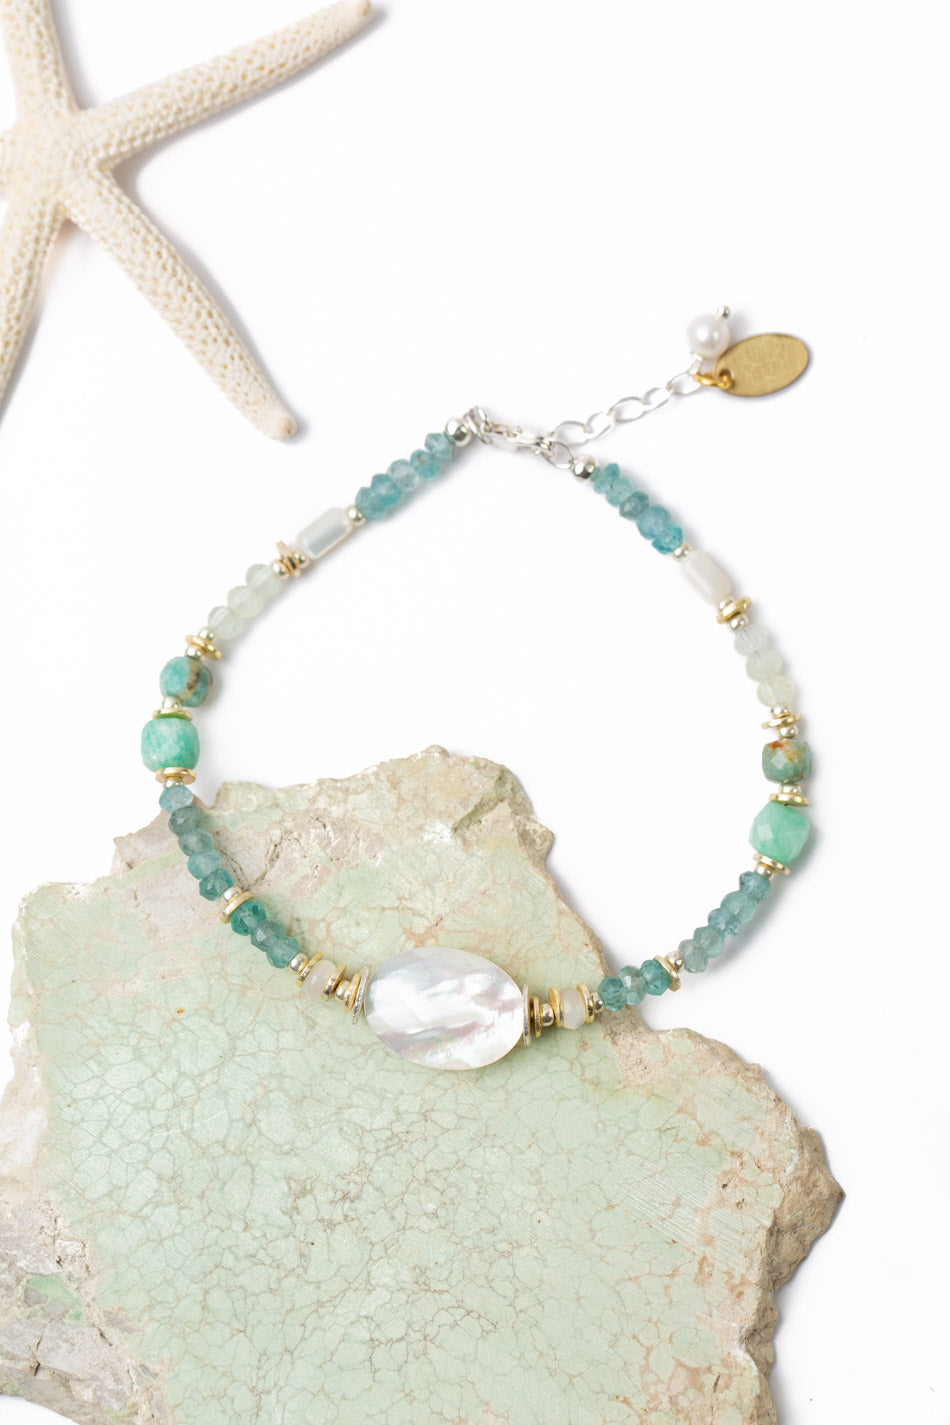 Serenity 7.5-8.5" Blue Apatite, Amazonite, Prehnite With Faceted Mother Of Pearl Collage Bracelet